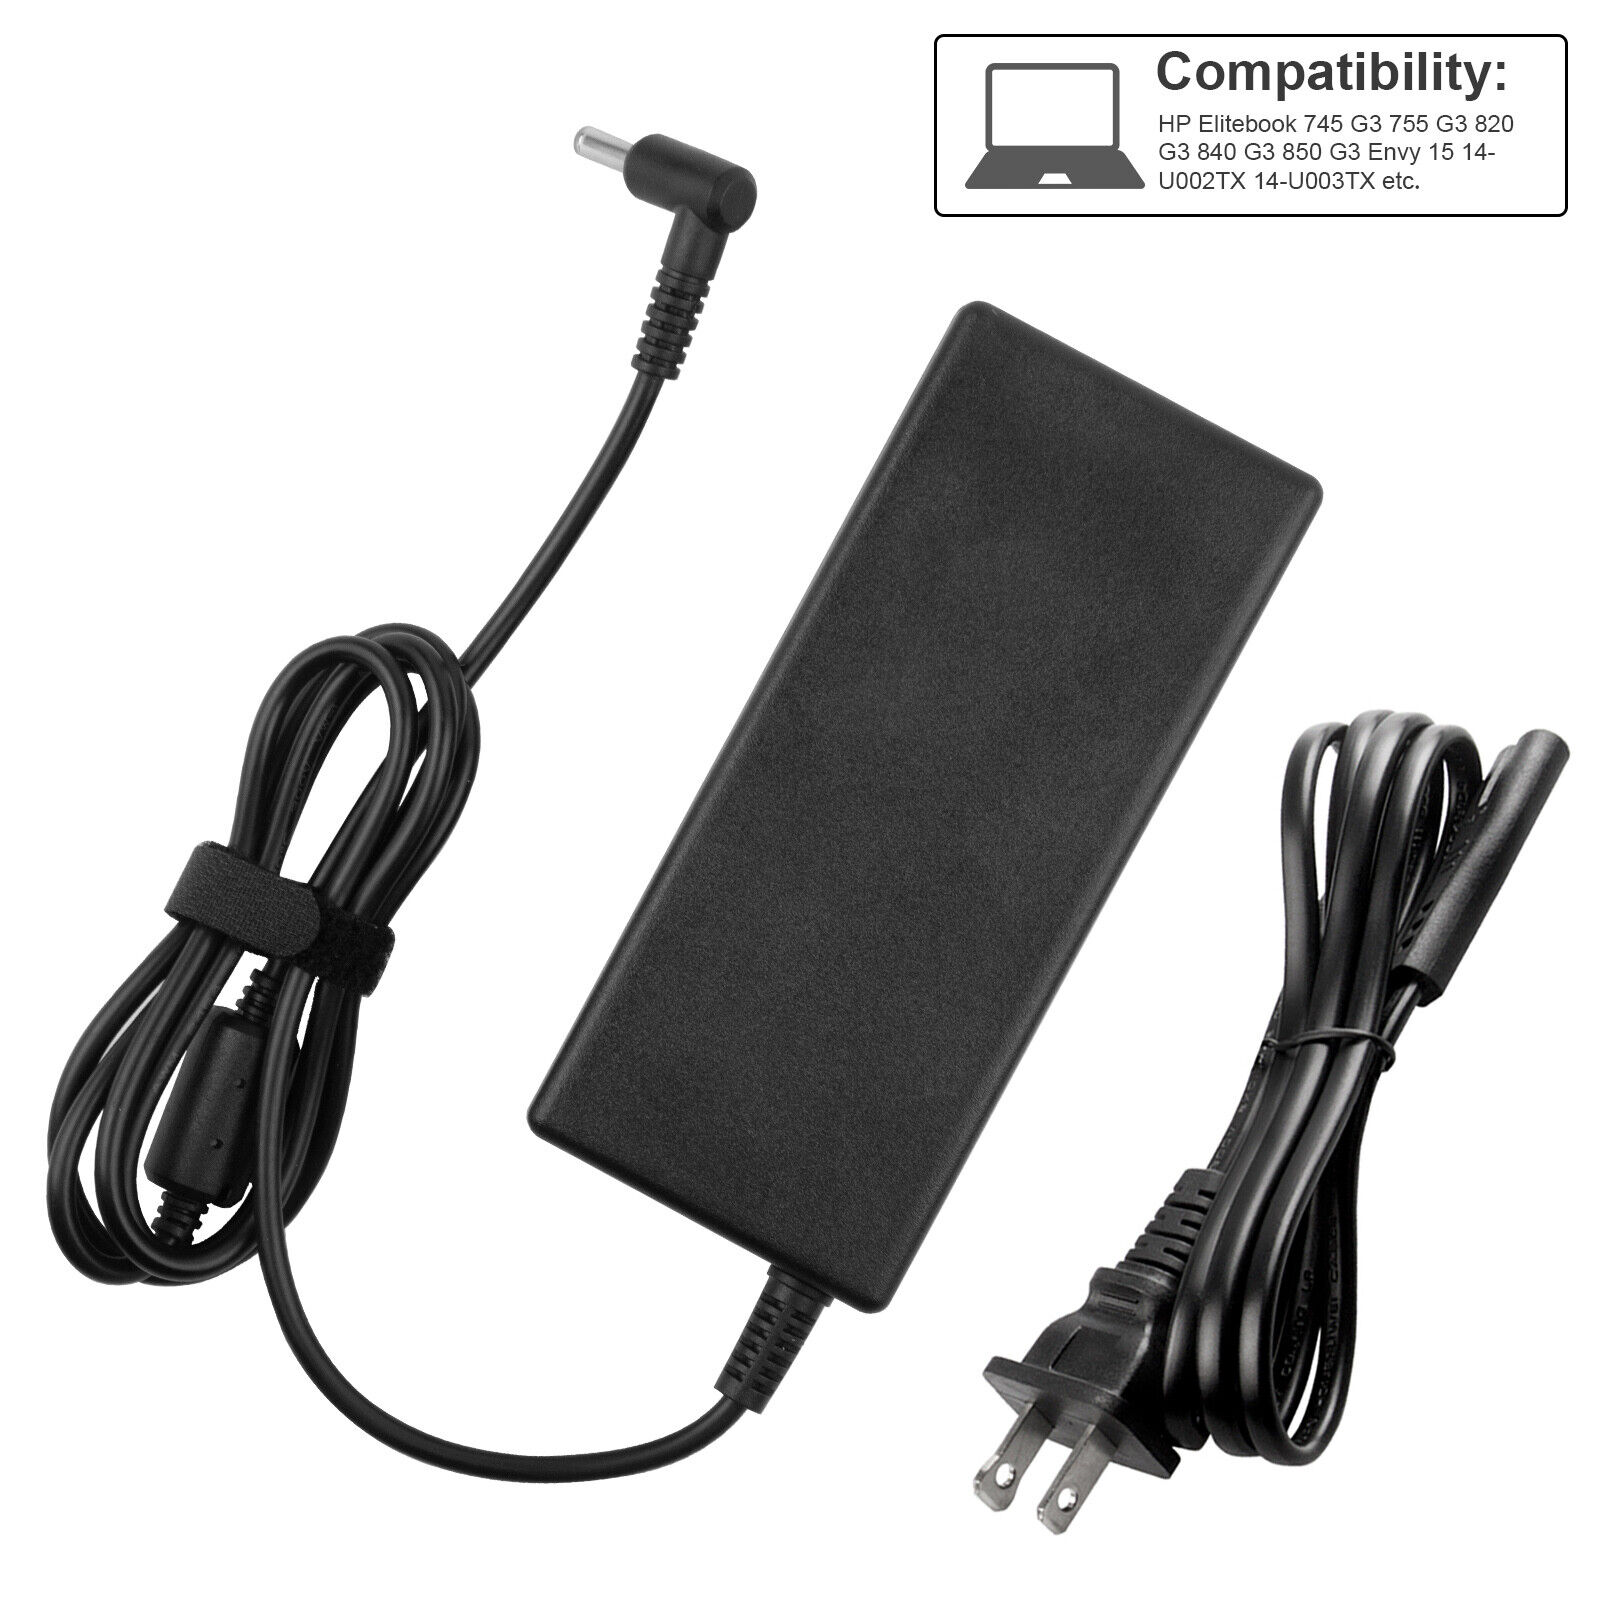 45W 65W 90W Charger for HP Pavilion Envy Notebook PC Laptop AC Adapter Type-C